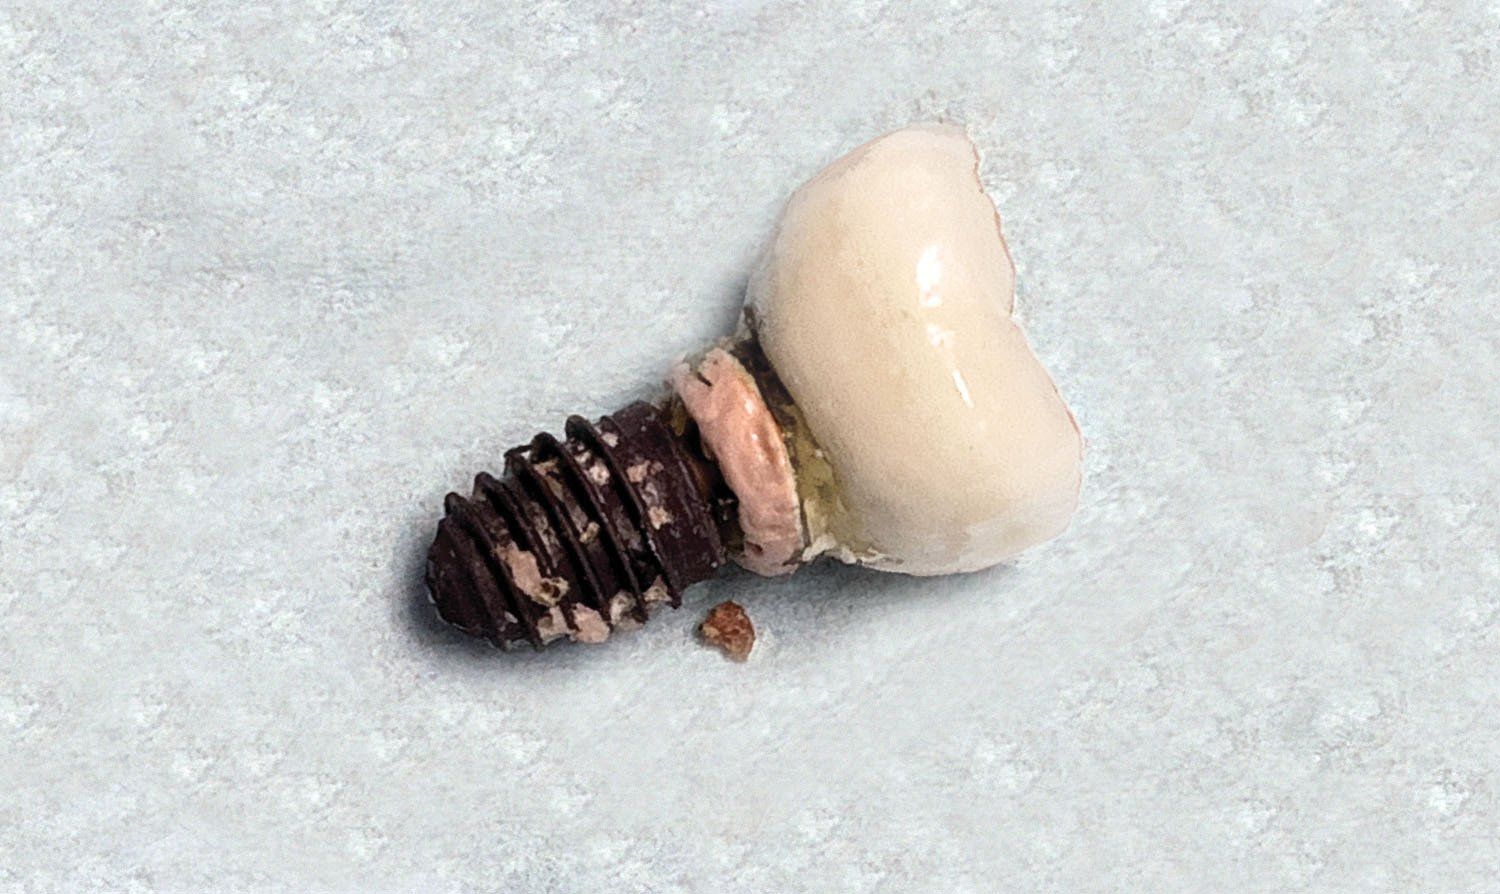 Image of a failed dental implant caused by cement irritation